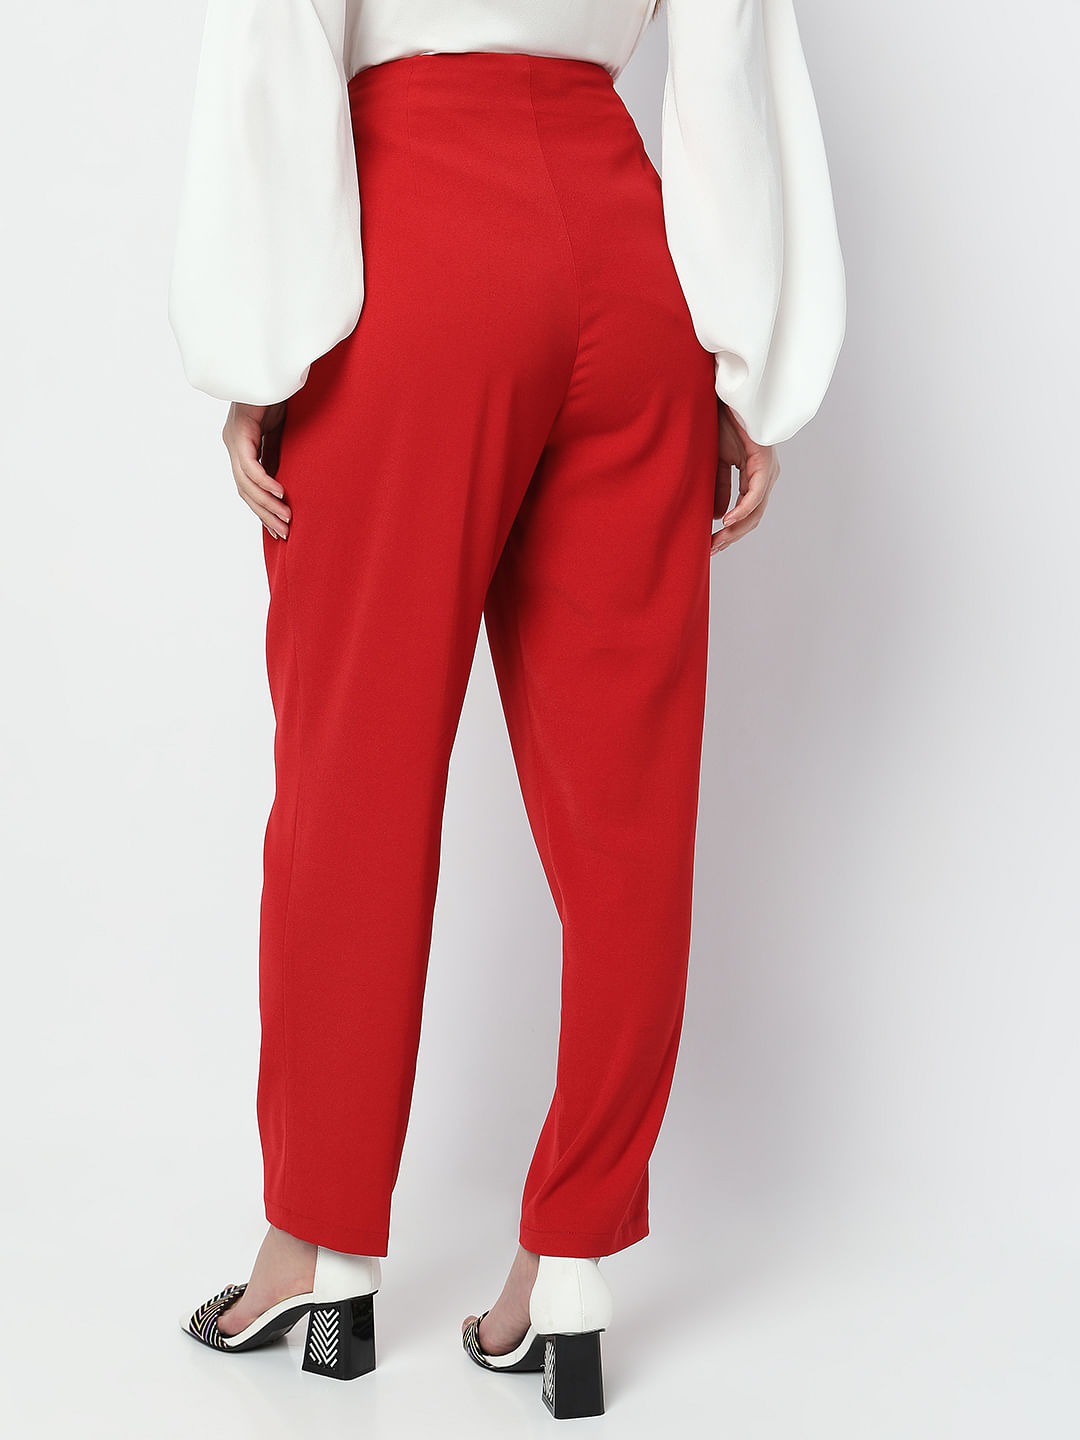 Red Woolen Pant For Women